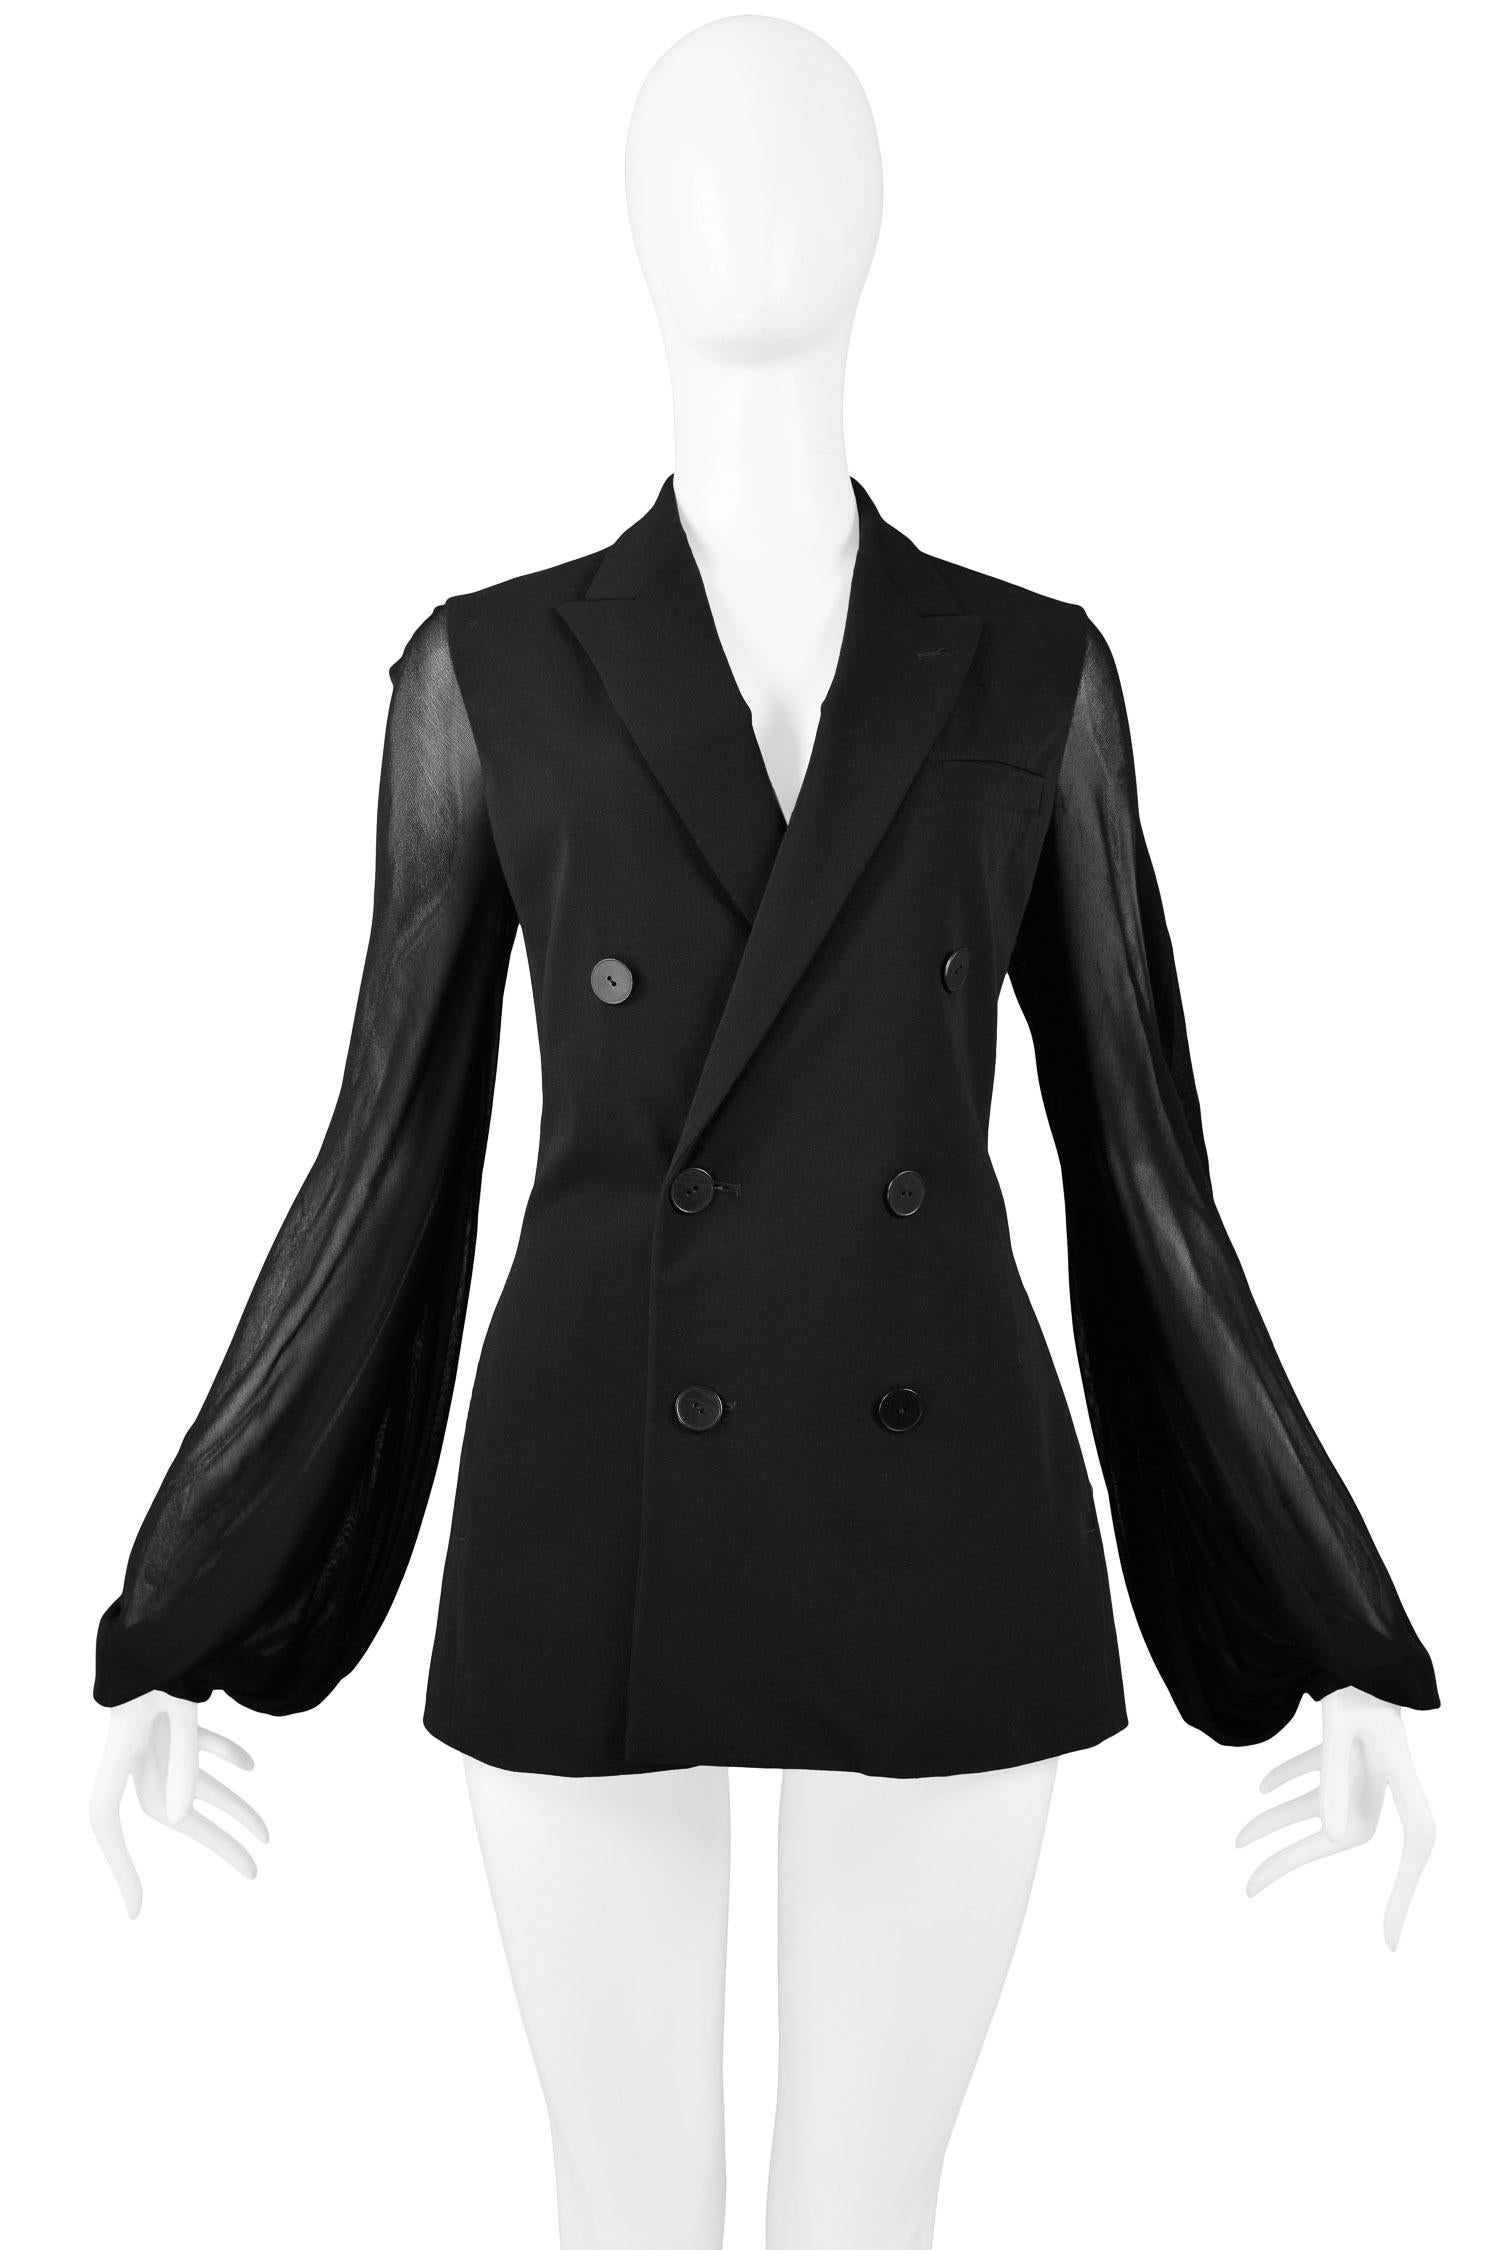 Vintage Jean Paul Gaultier black double breasted fitted blazer jacket with sheer mesh bishop sleeves.

Excellent Vintage Condition.

Size IT 40